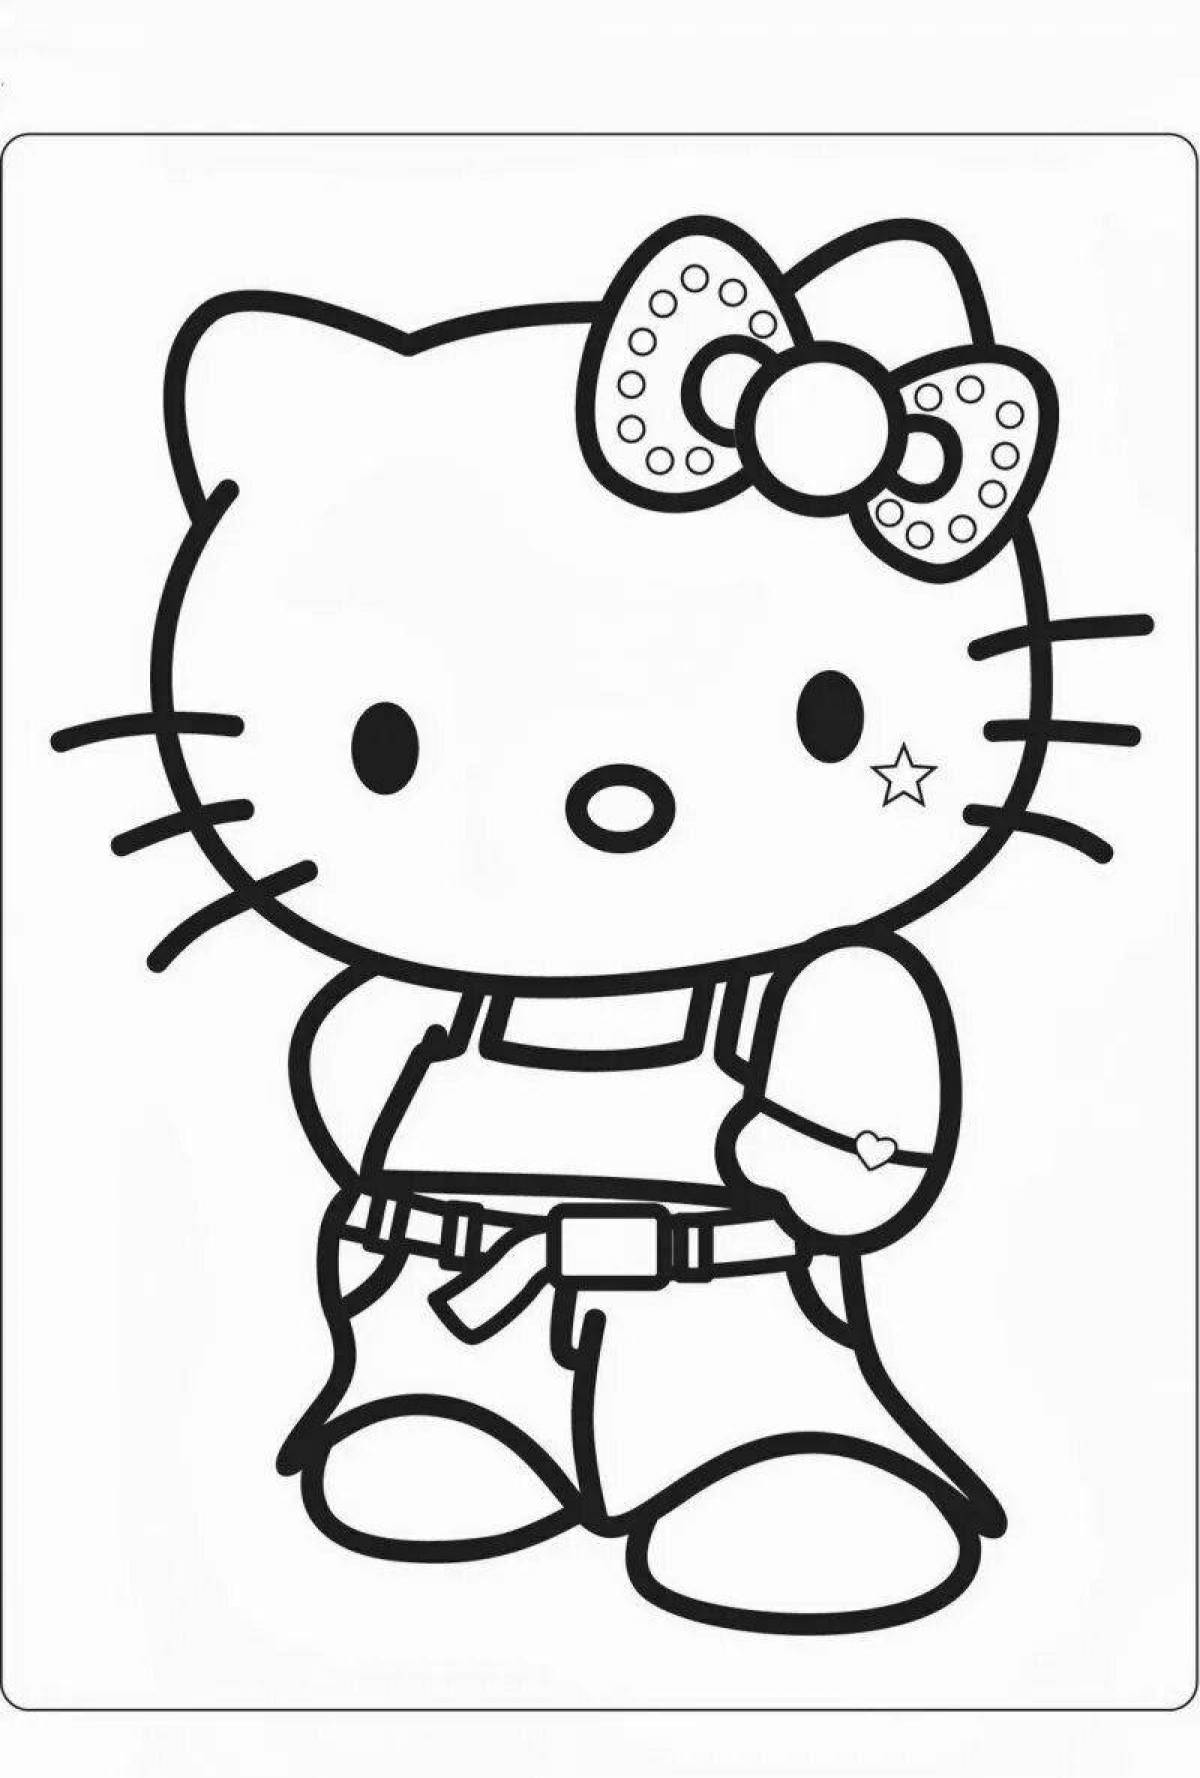 Exciting hello kitty poster